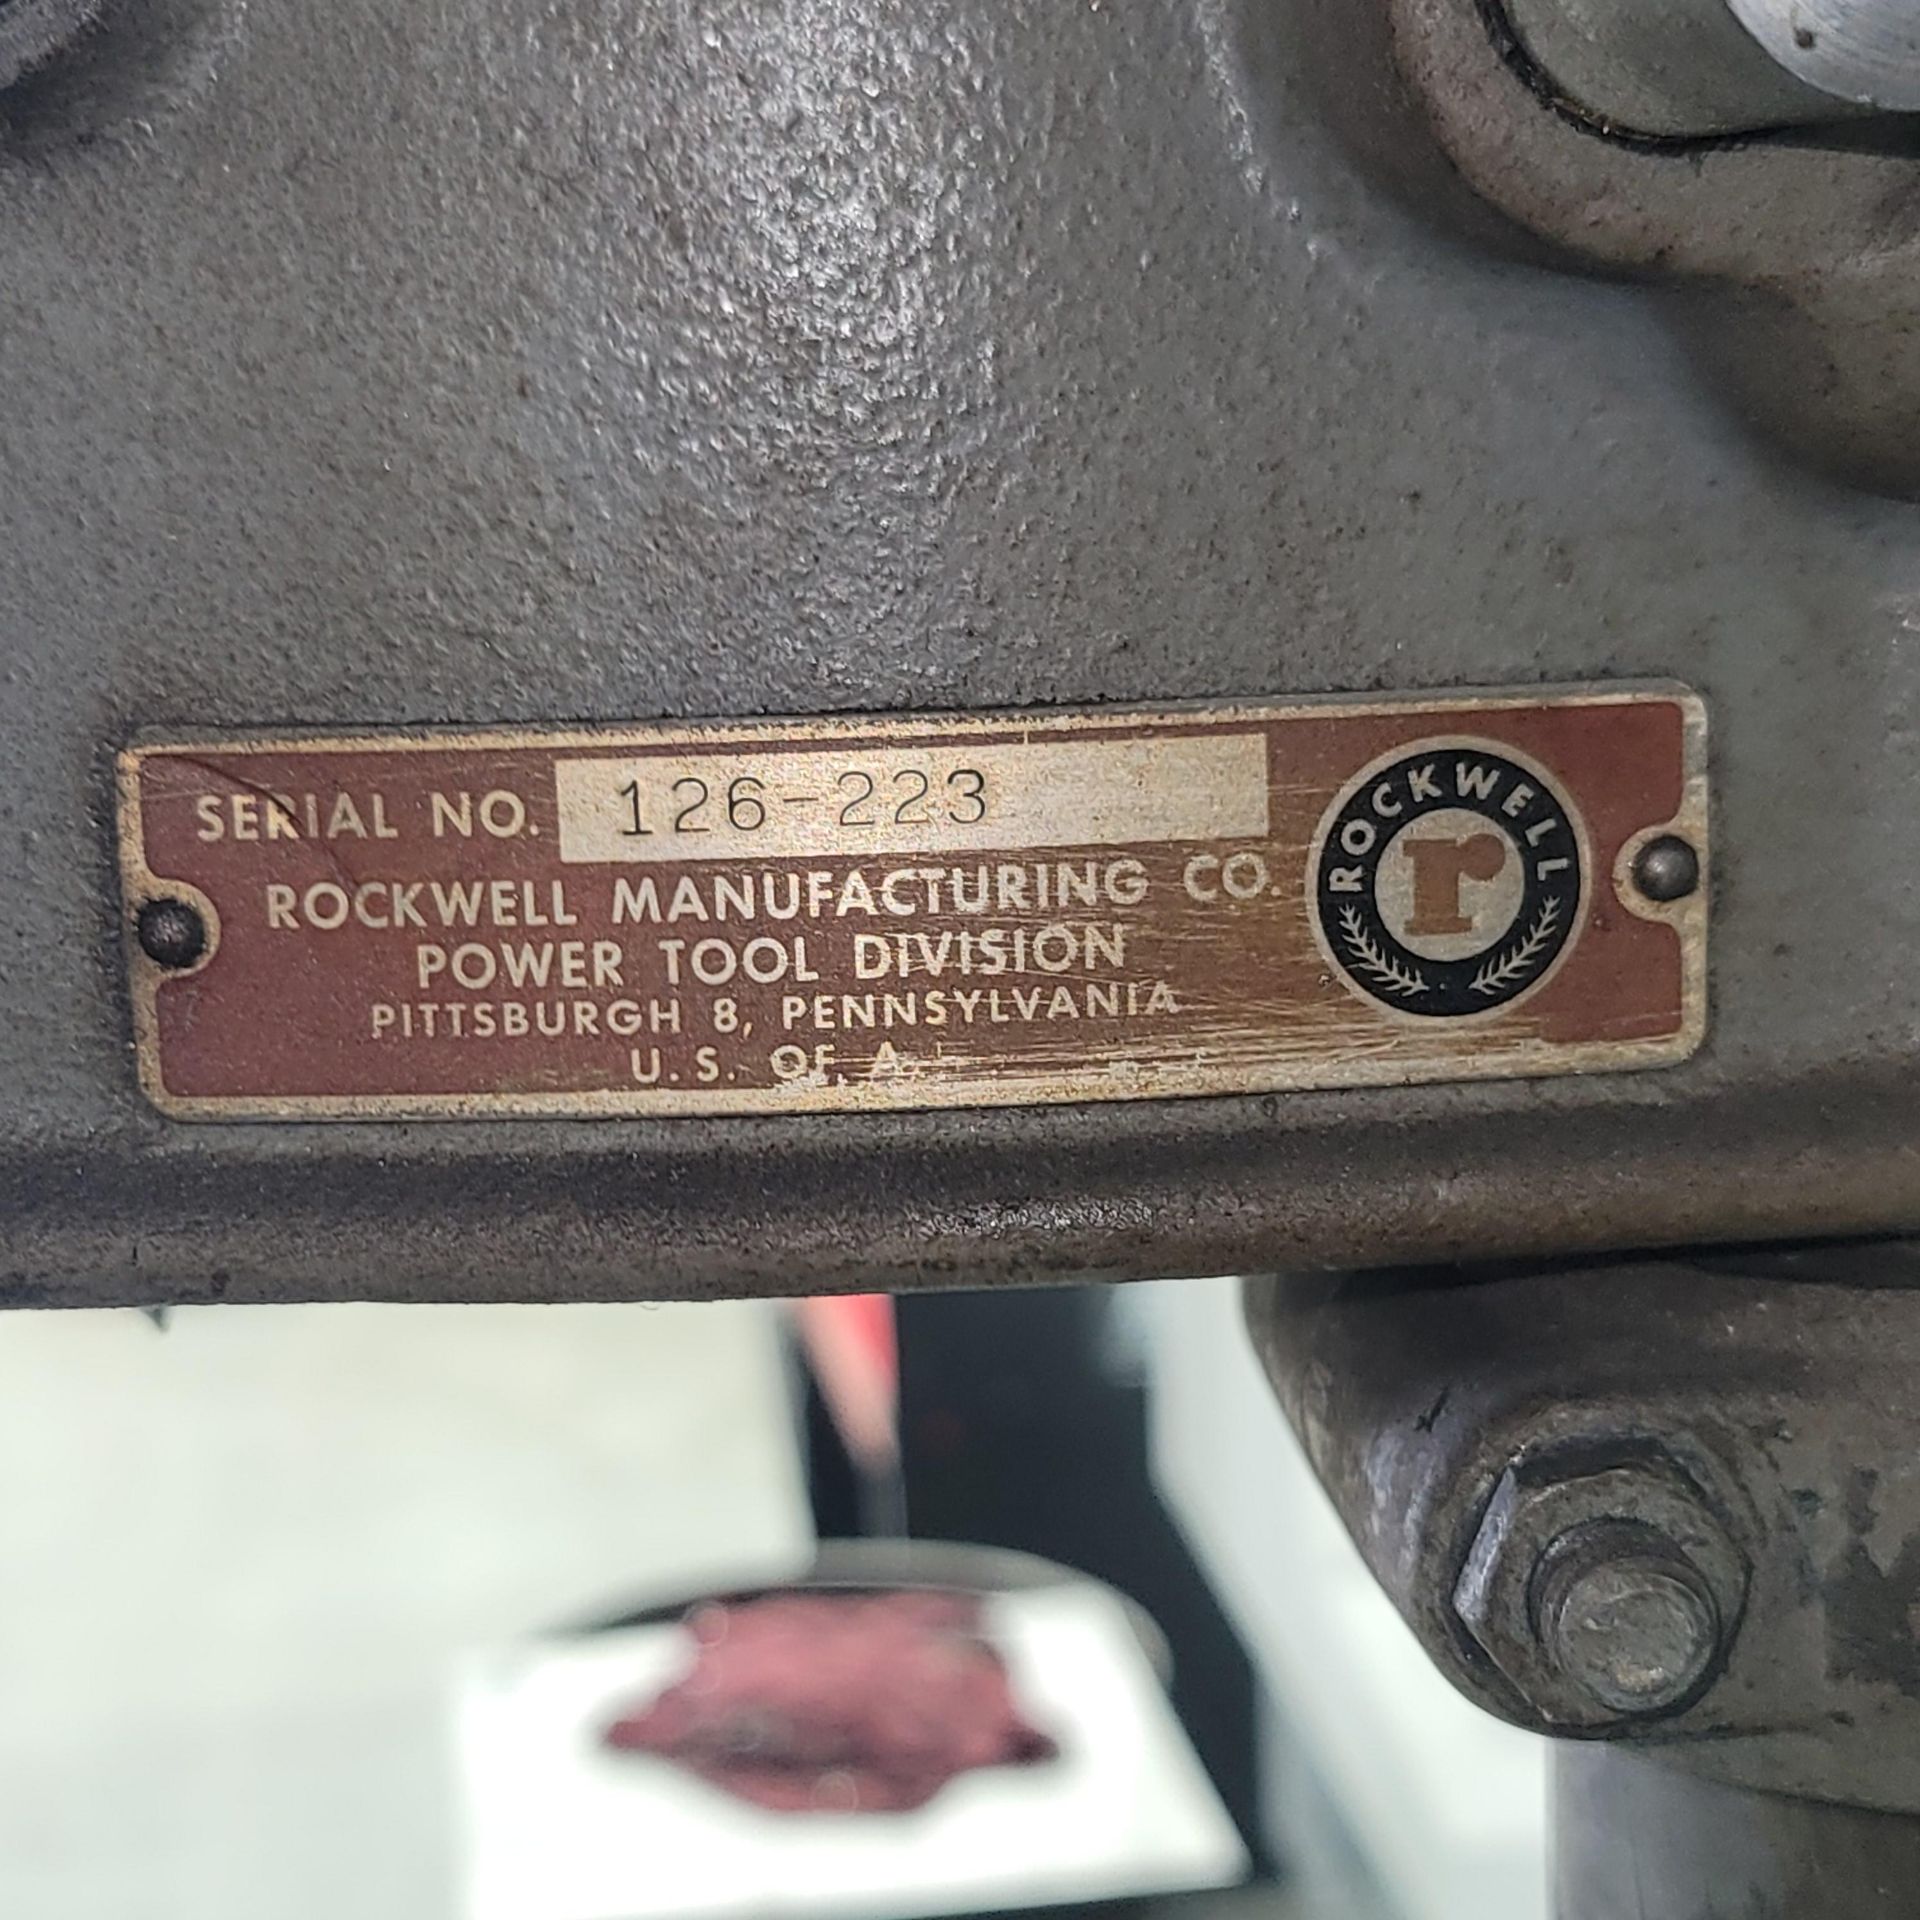 WALKER TURNER/ROCKWELL 14" BENCHTOP DRILL PRESS, S/N 126-223 - Image 2 of 2